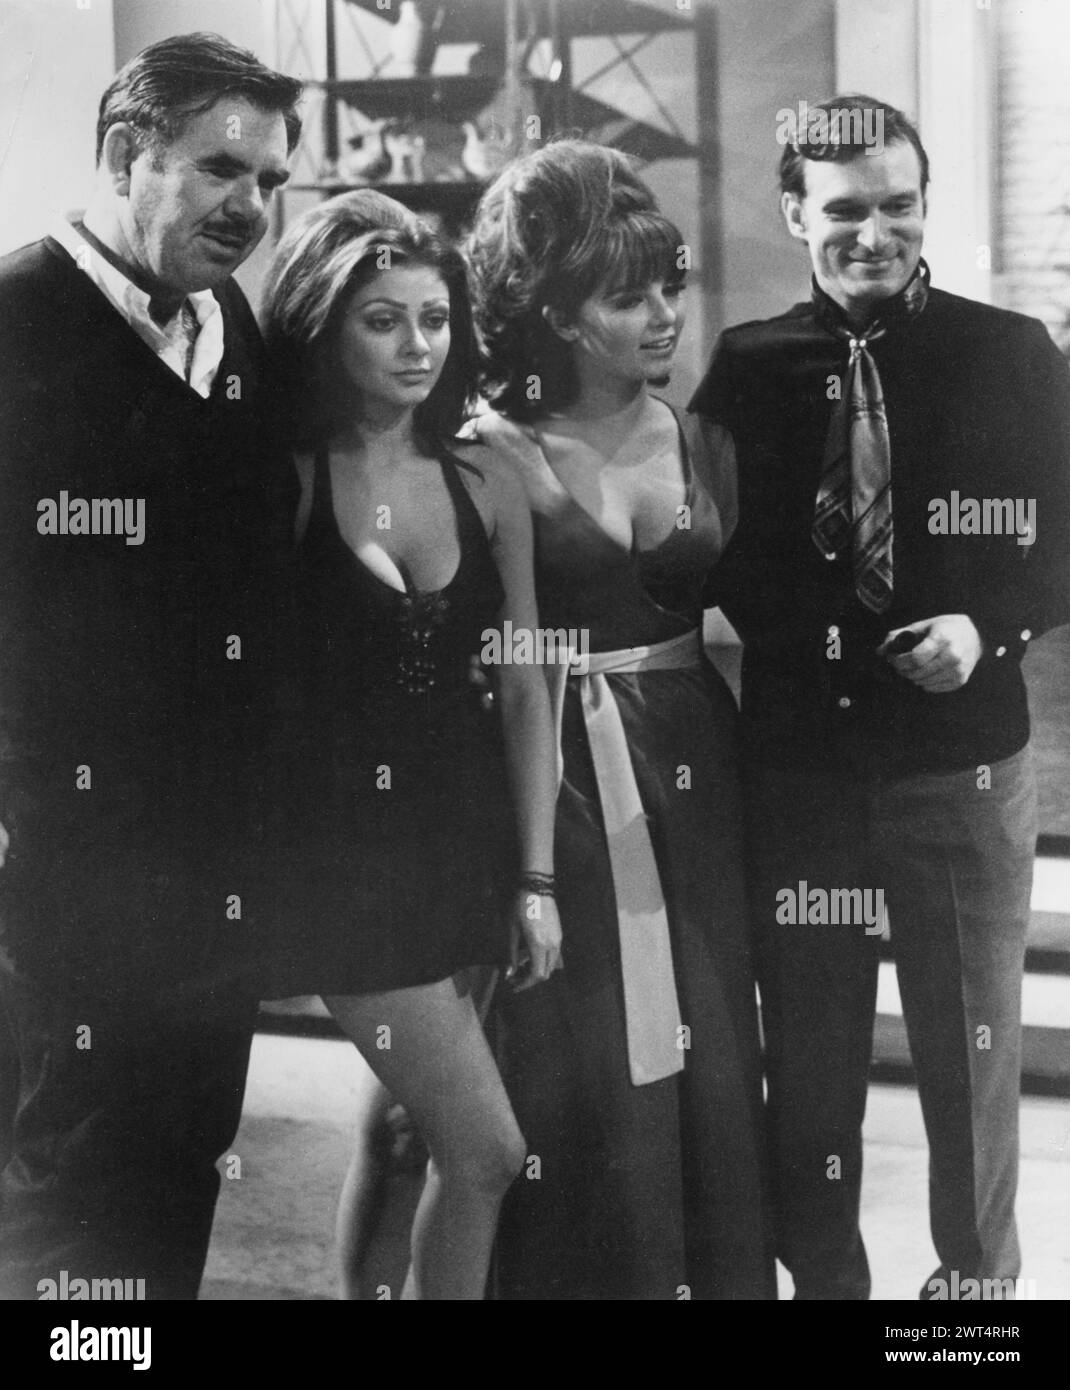 Film Director RUSS MEYER with CYNTHIA MYERS, DOLLY READ and PLAYBOY publisher HUGH HEFNER on the set of BEYOND THE VALLEY OF THE DOLLS 1970 20th Century Fox Stock Photo